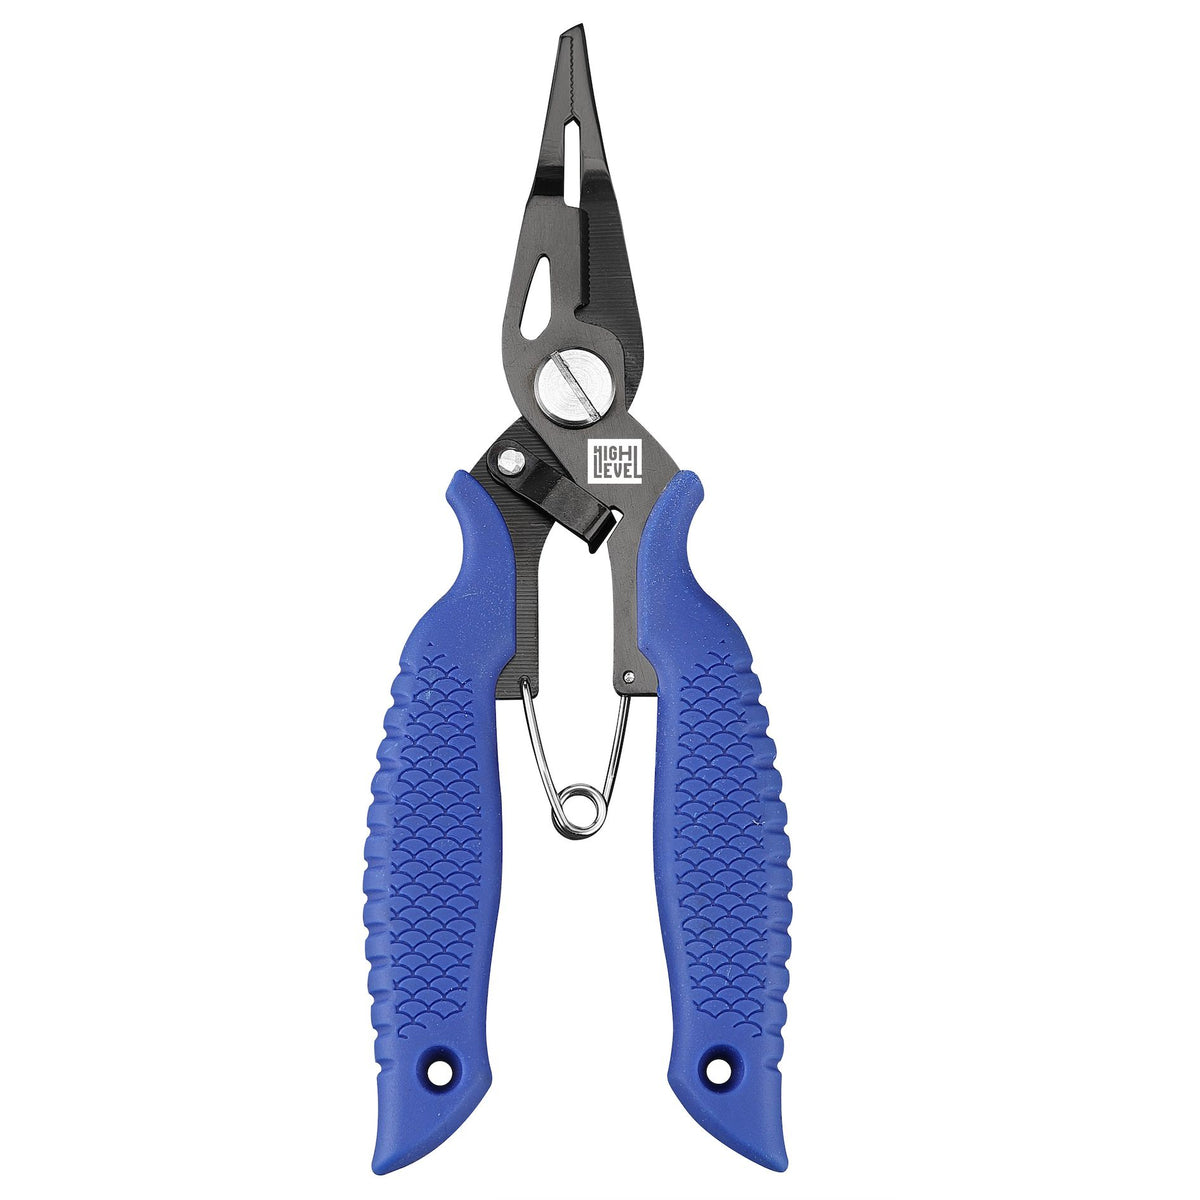  Goture Fishing Pliers, Saltwater Line Cutter with Split Ring  Pliers, Fishing Hook Remover, Corrosion Resistant Fishing Needle Nose  Pliers with Sheath Lanyard, Fishing Gear : Sports & Outdoors